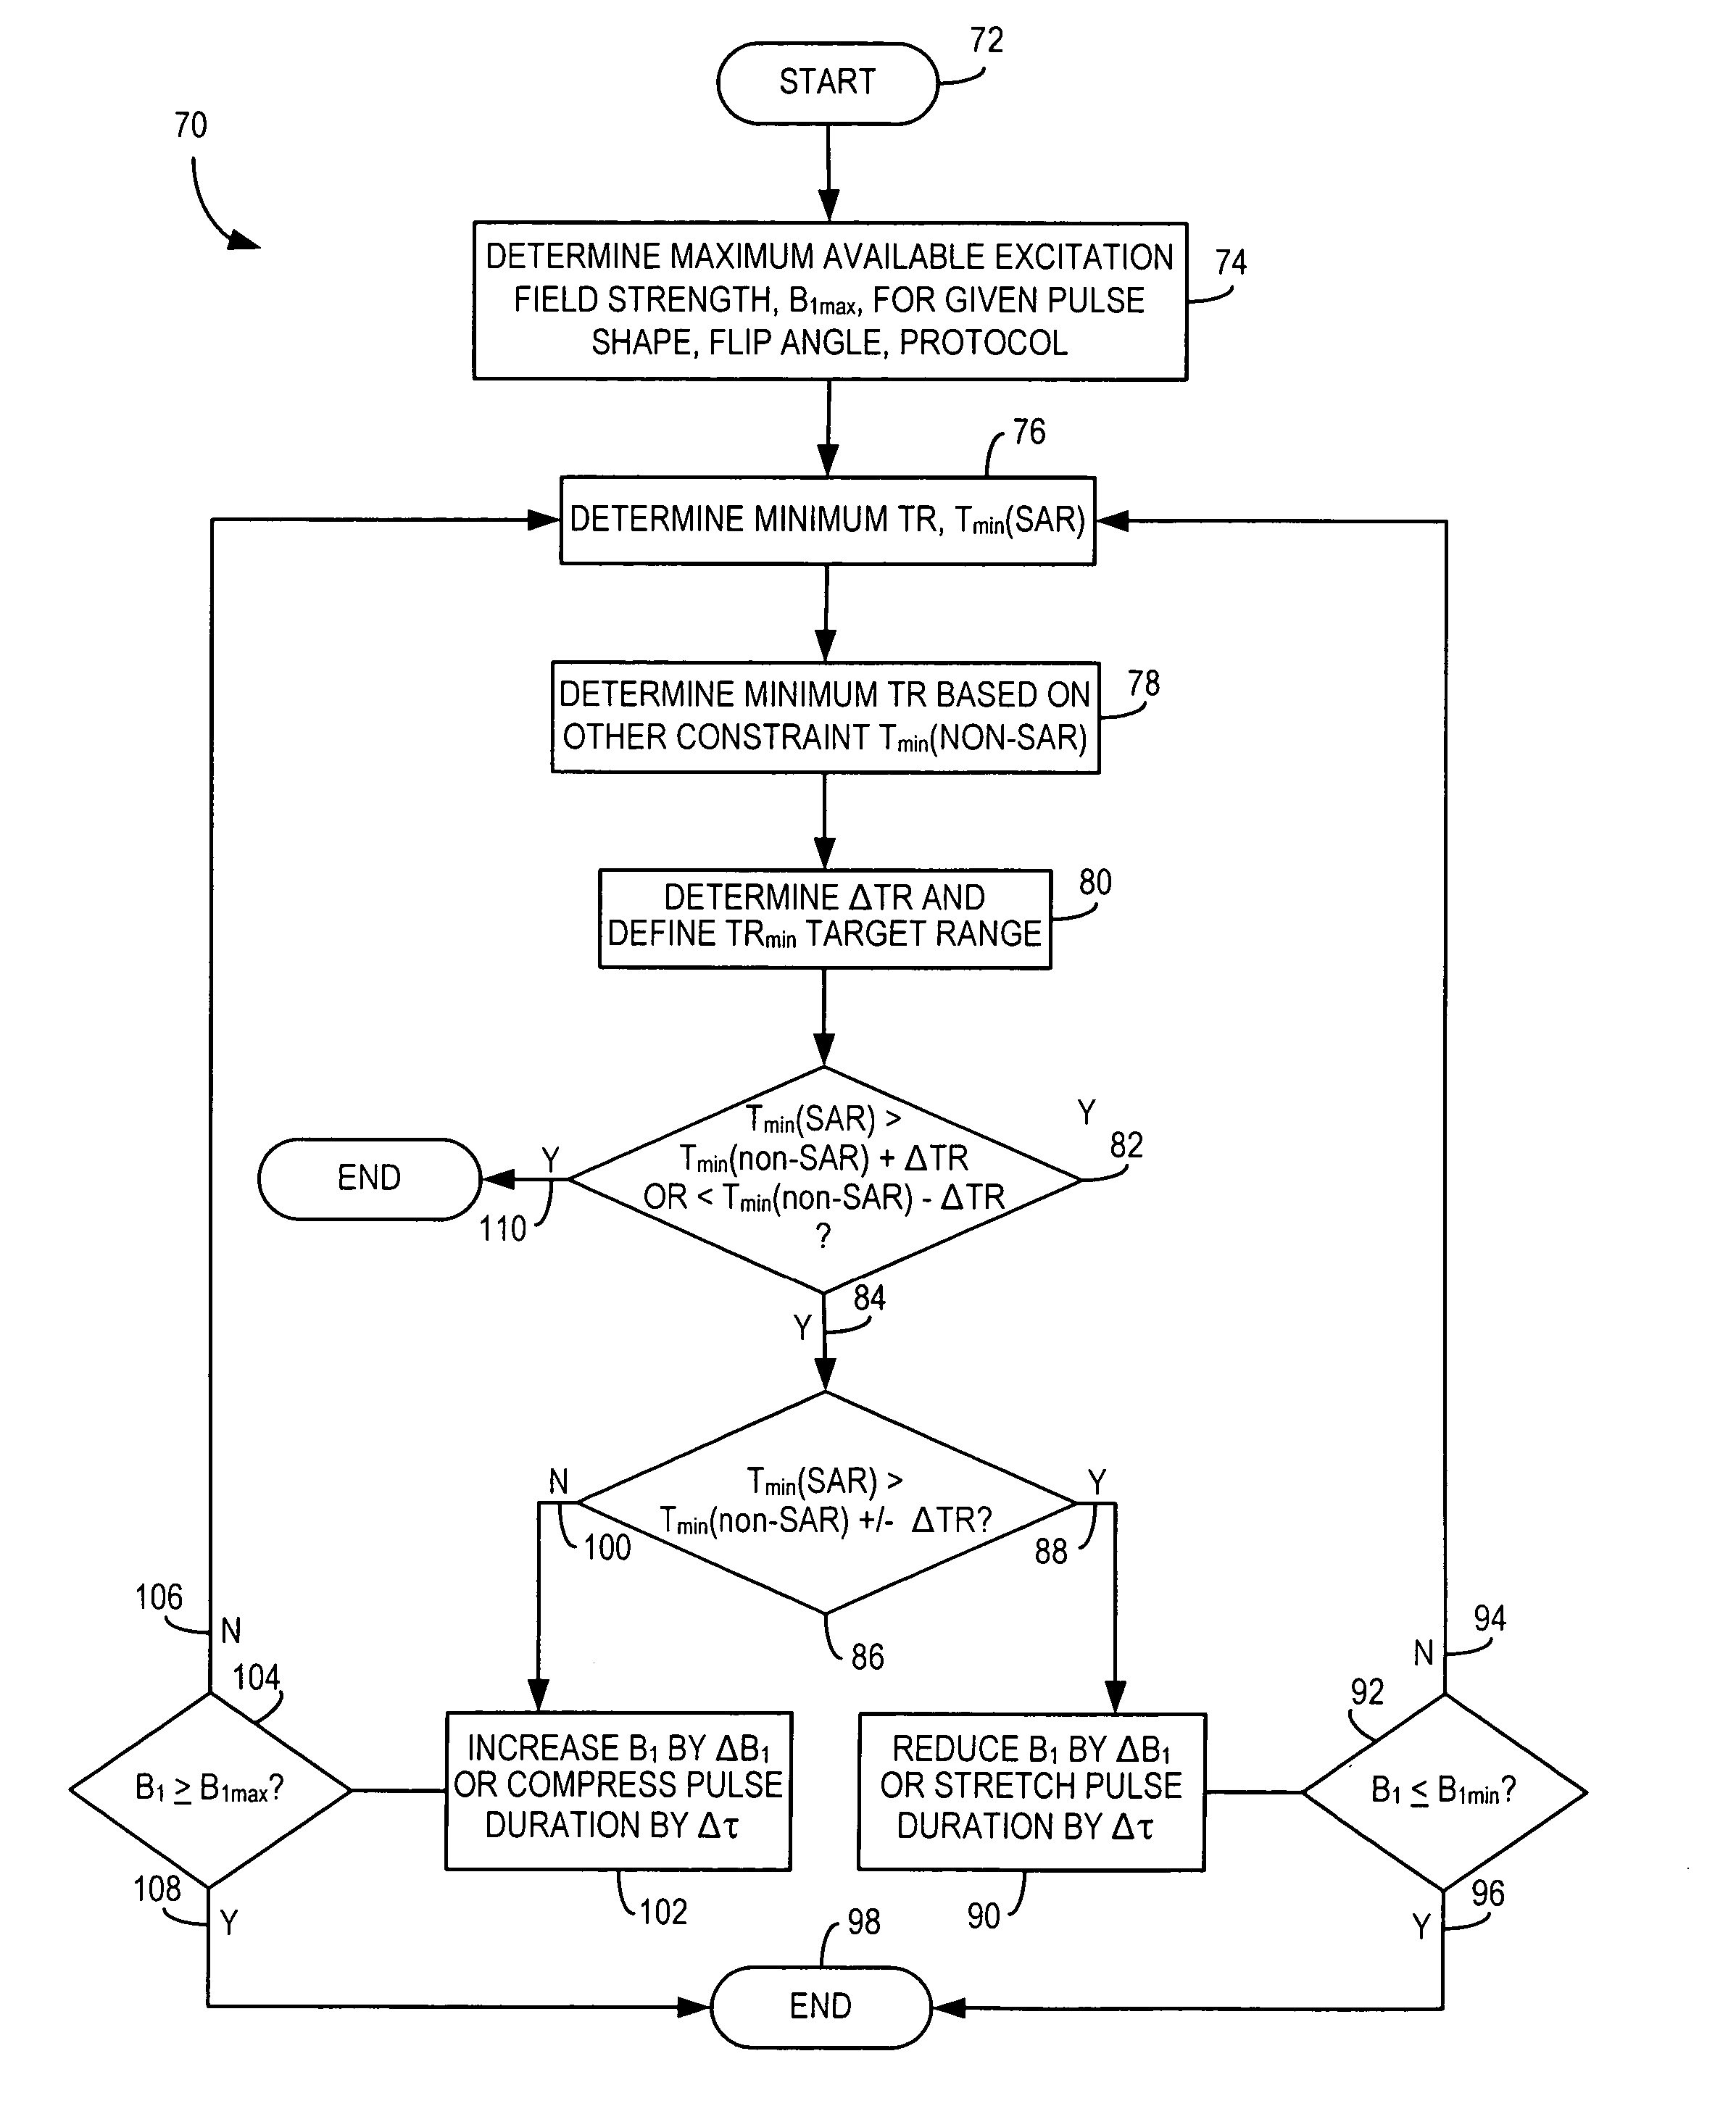 Method and system of determining parameters for MR data acquisition with real-time B<sub>1 </sub>optimization